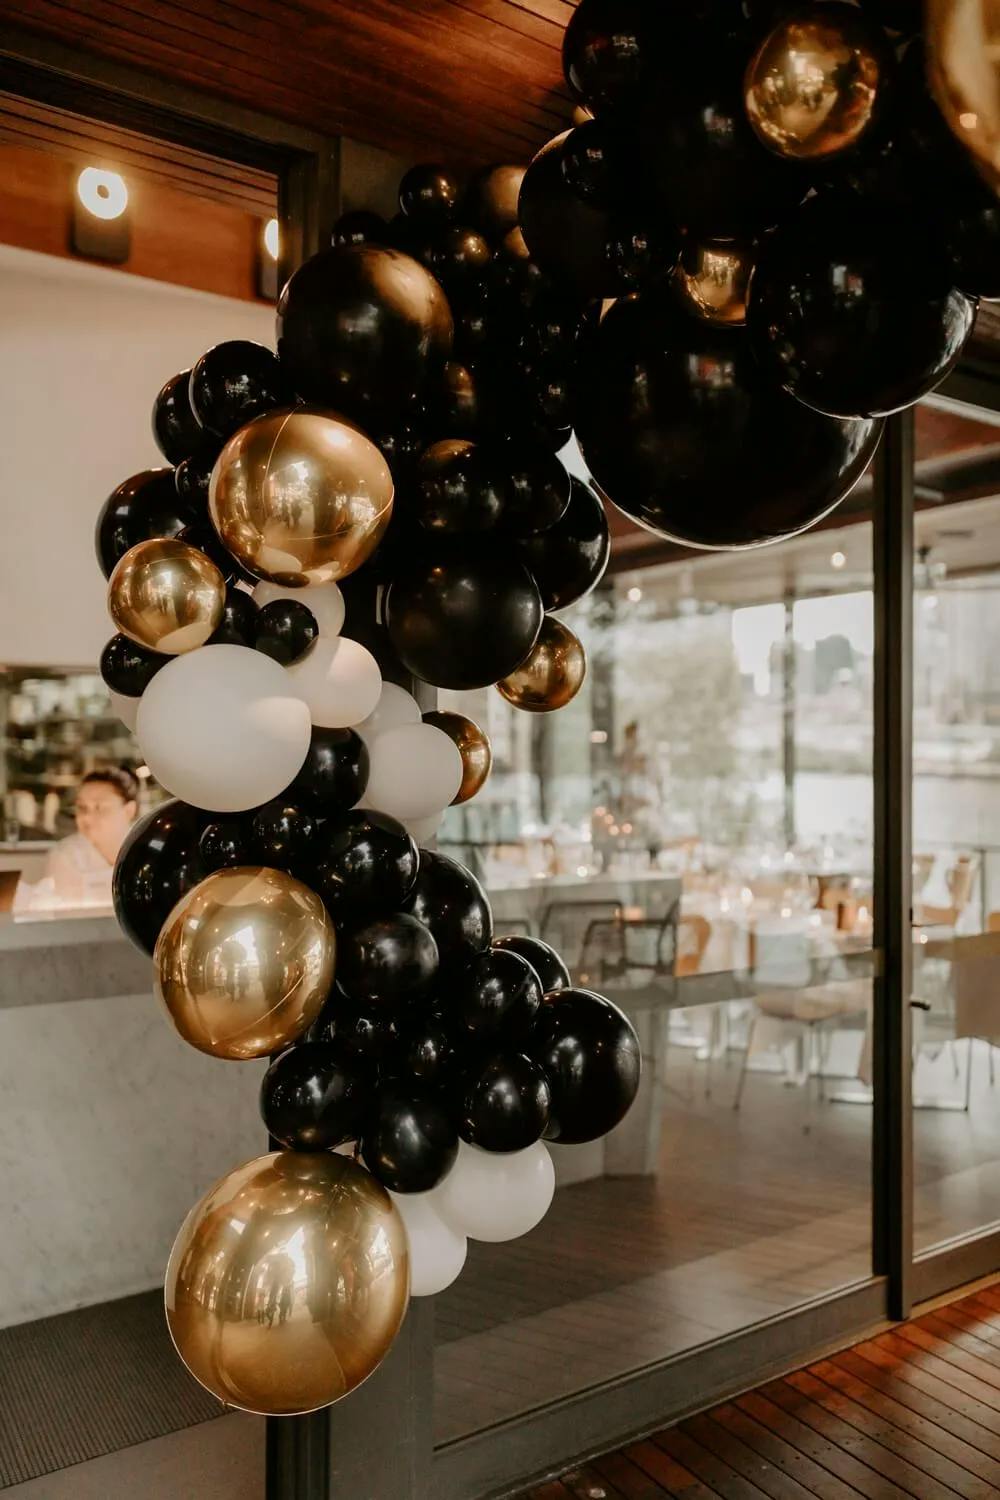 A decorative arch made of black, gold, and white balloons is displayed near the entrance of a modern indoor event space. The interior features glass walls, wooden accents, and a view of dining tables set up with elegant place settings.